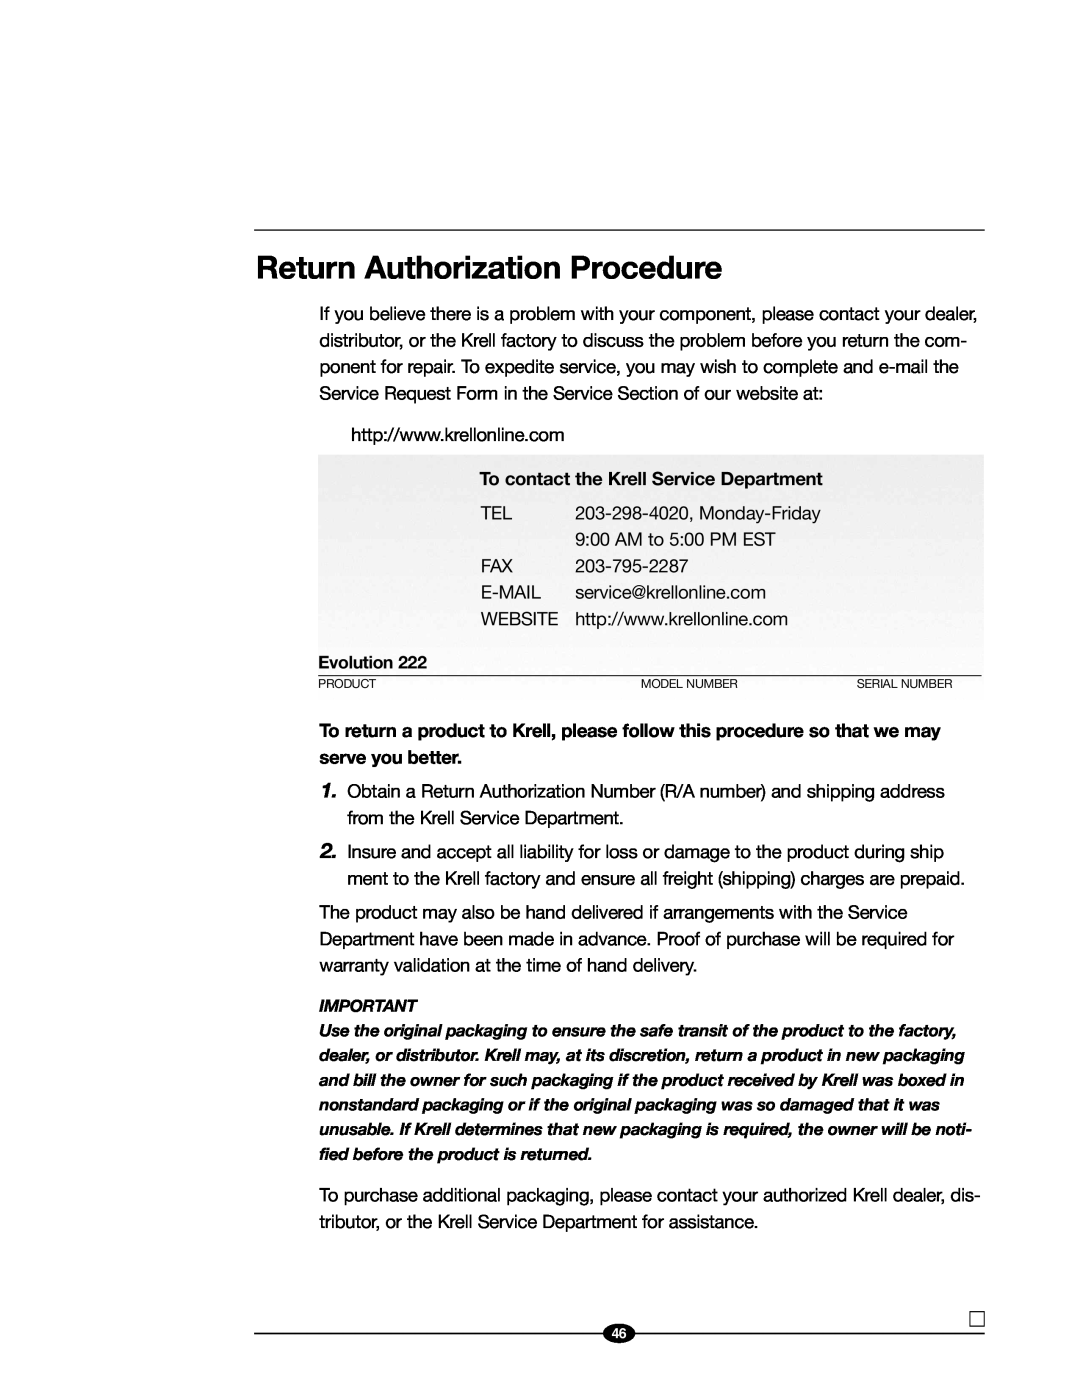 Evolution Technologies 222 manual Return Authorization Procedure, To contact the Krell Service Department, serve you better 